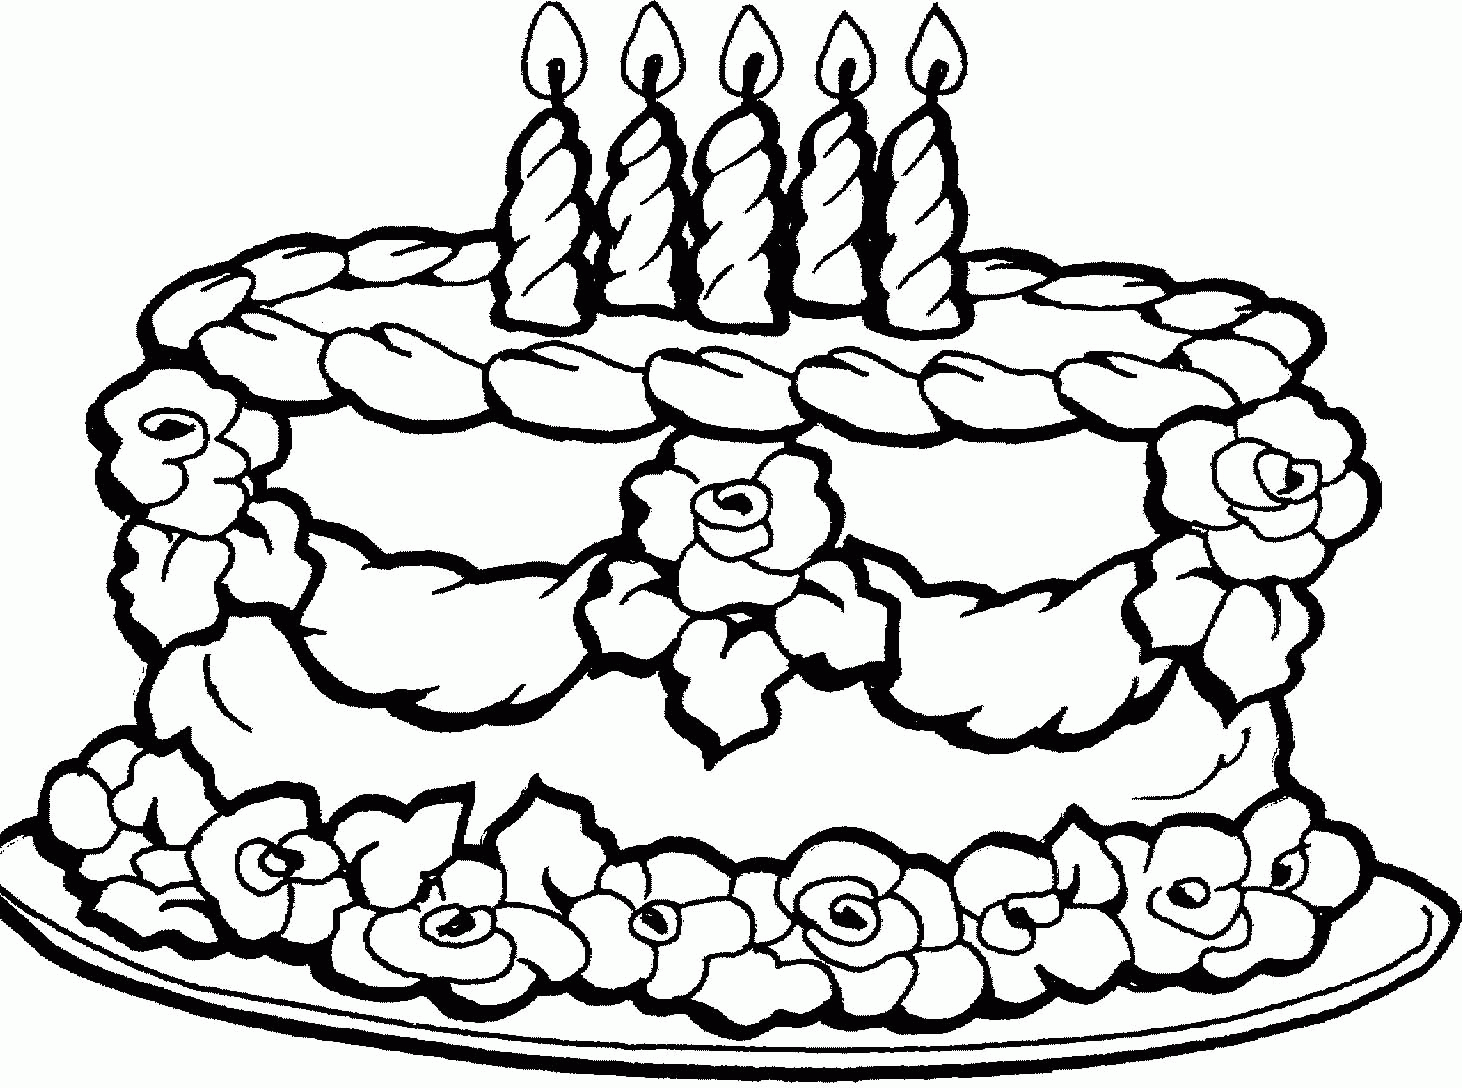 Cool Nice Birthday Cake For 5 Years Old Coloring Page